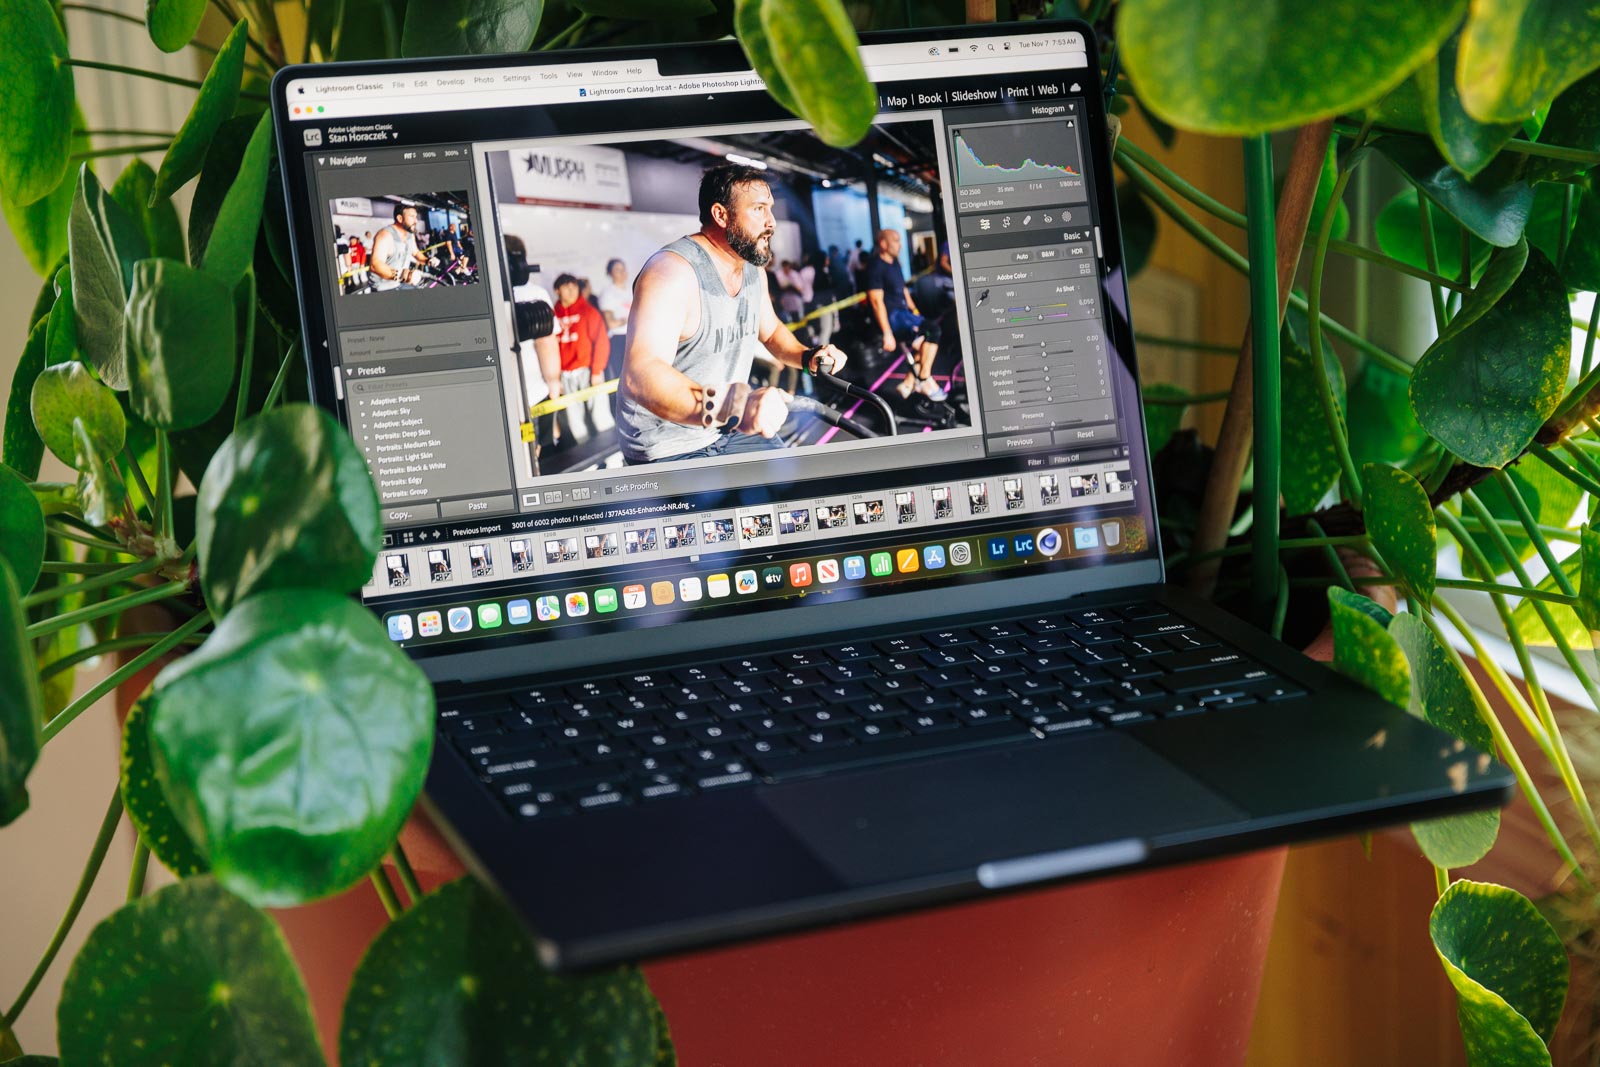 Apple 14-inch MacBook Pro review: Superb, but is it overkill for